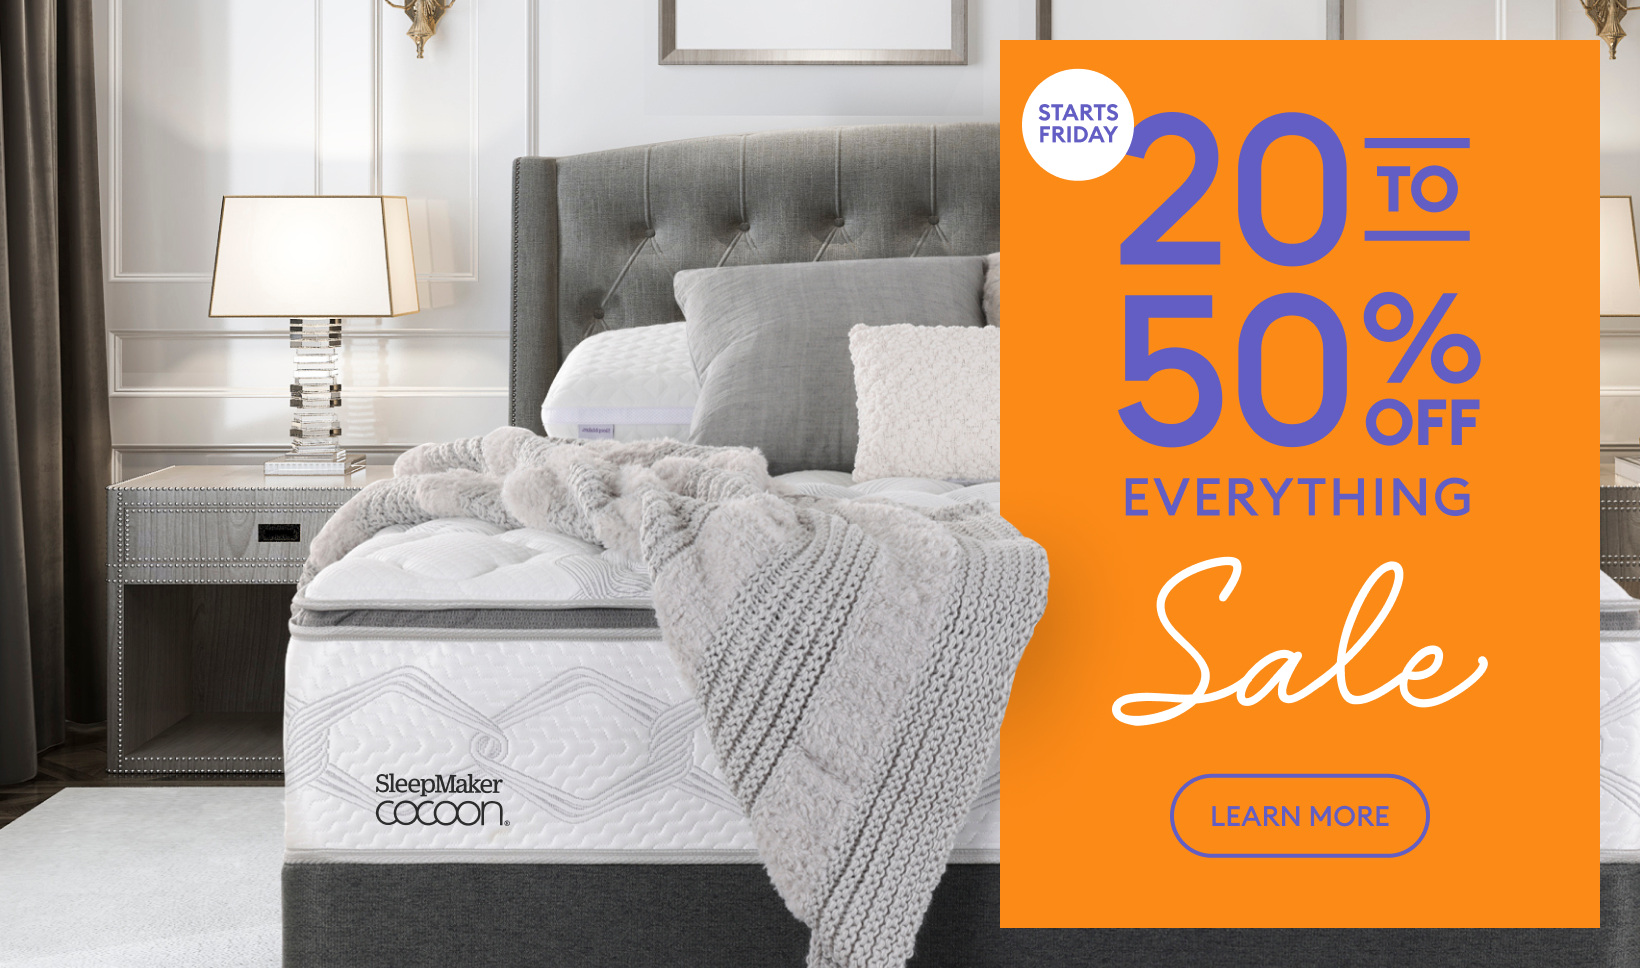 20-50% off Everything Campaign - Starts Friday | Bedshed